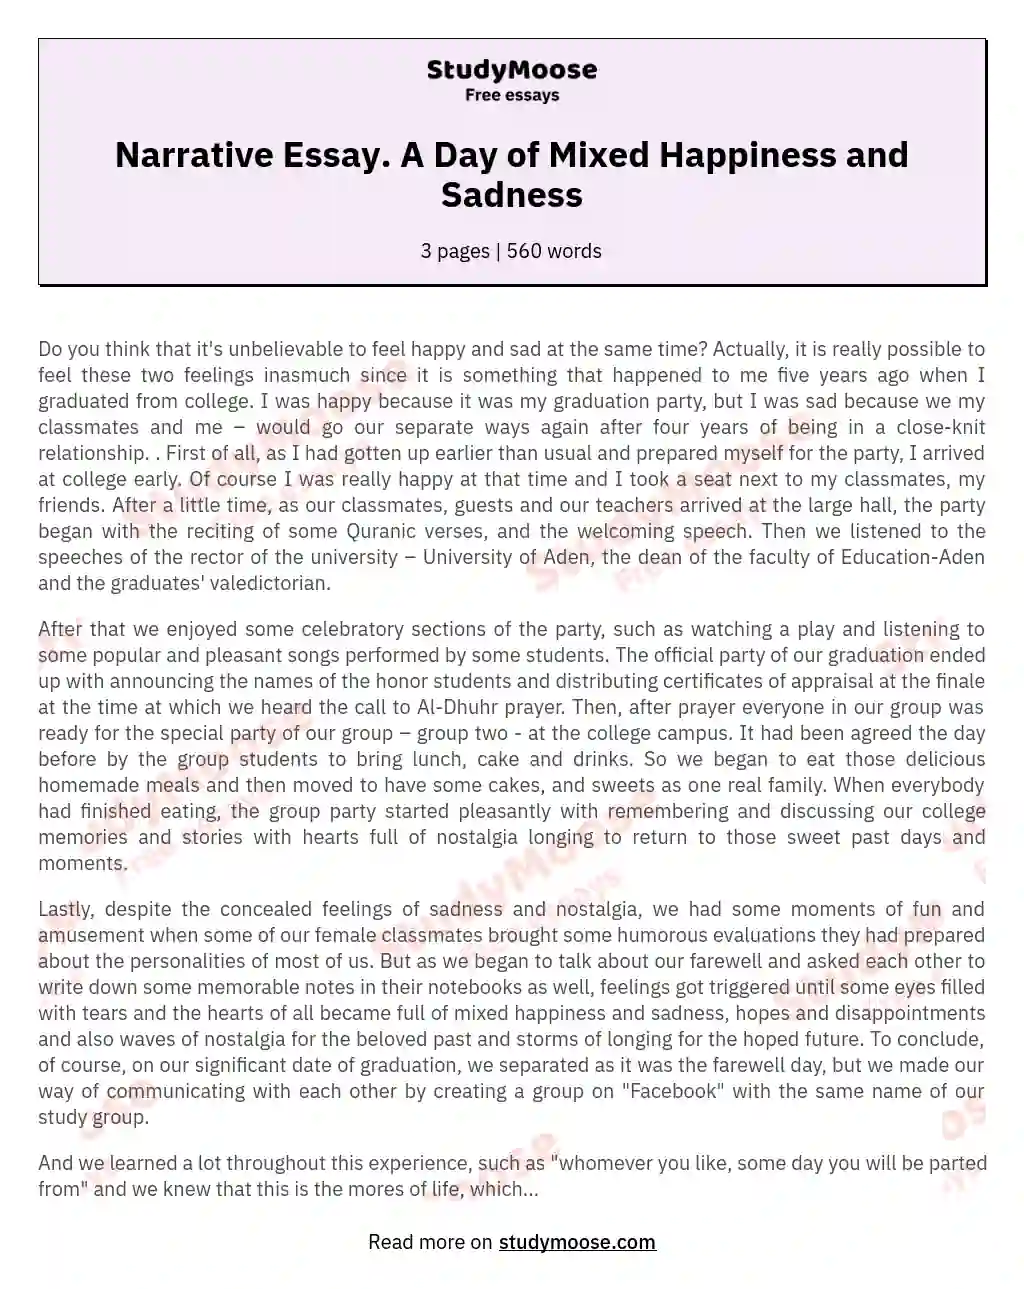 Narrative Essay. A Day of Mixed Happiness and Sadness essay